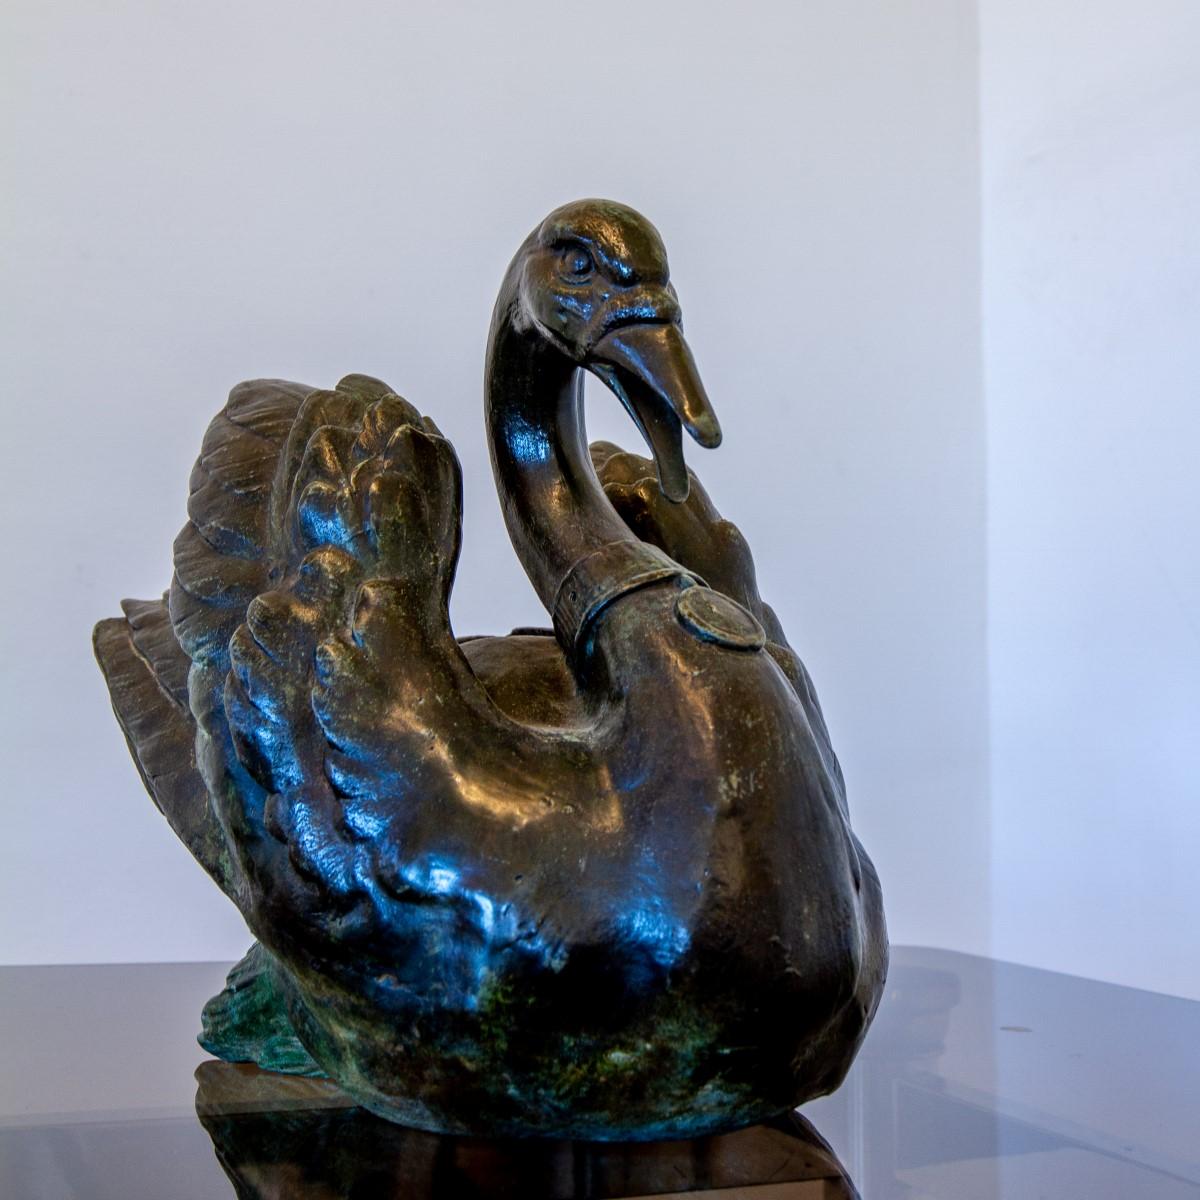 A unique bronze fountain of a swan, cast from a 19th century English fountain. The water can be plumbed to come out of its beak. Editioned 1/3.